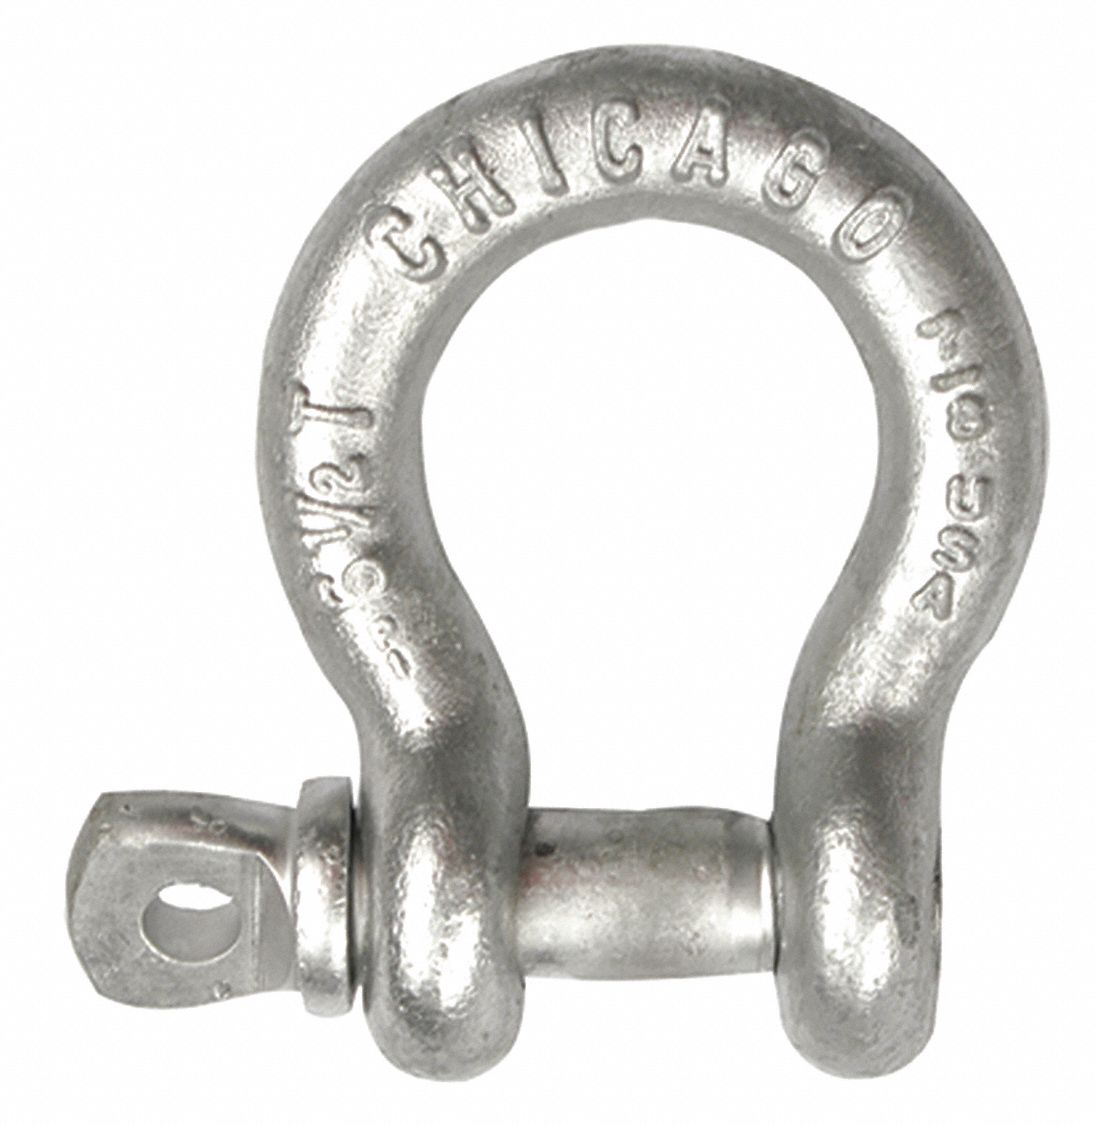 GRAINGER APPROVED 55AY01 Chain Shackle,Screw Pin,3/8" Body Size 